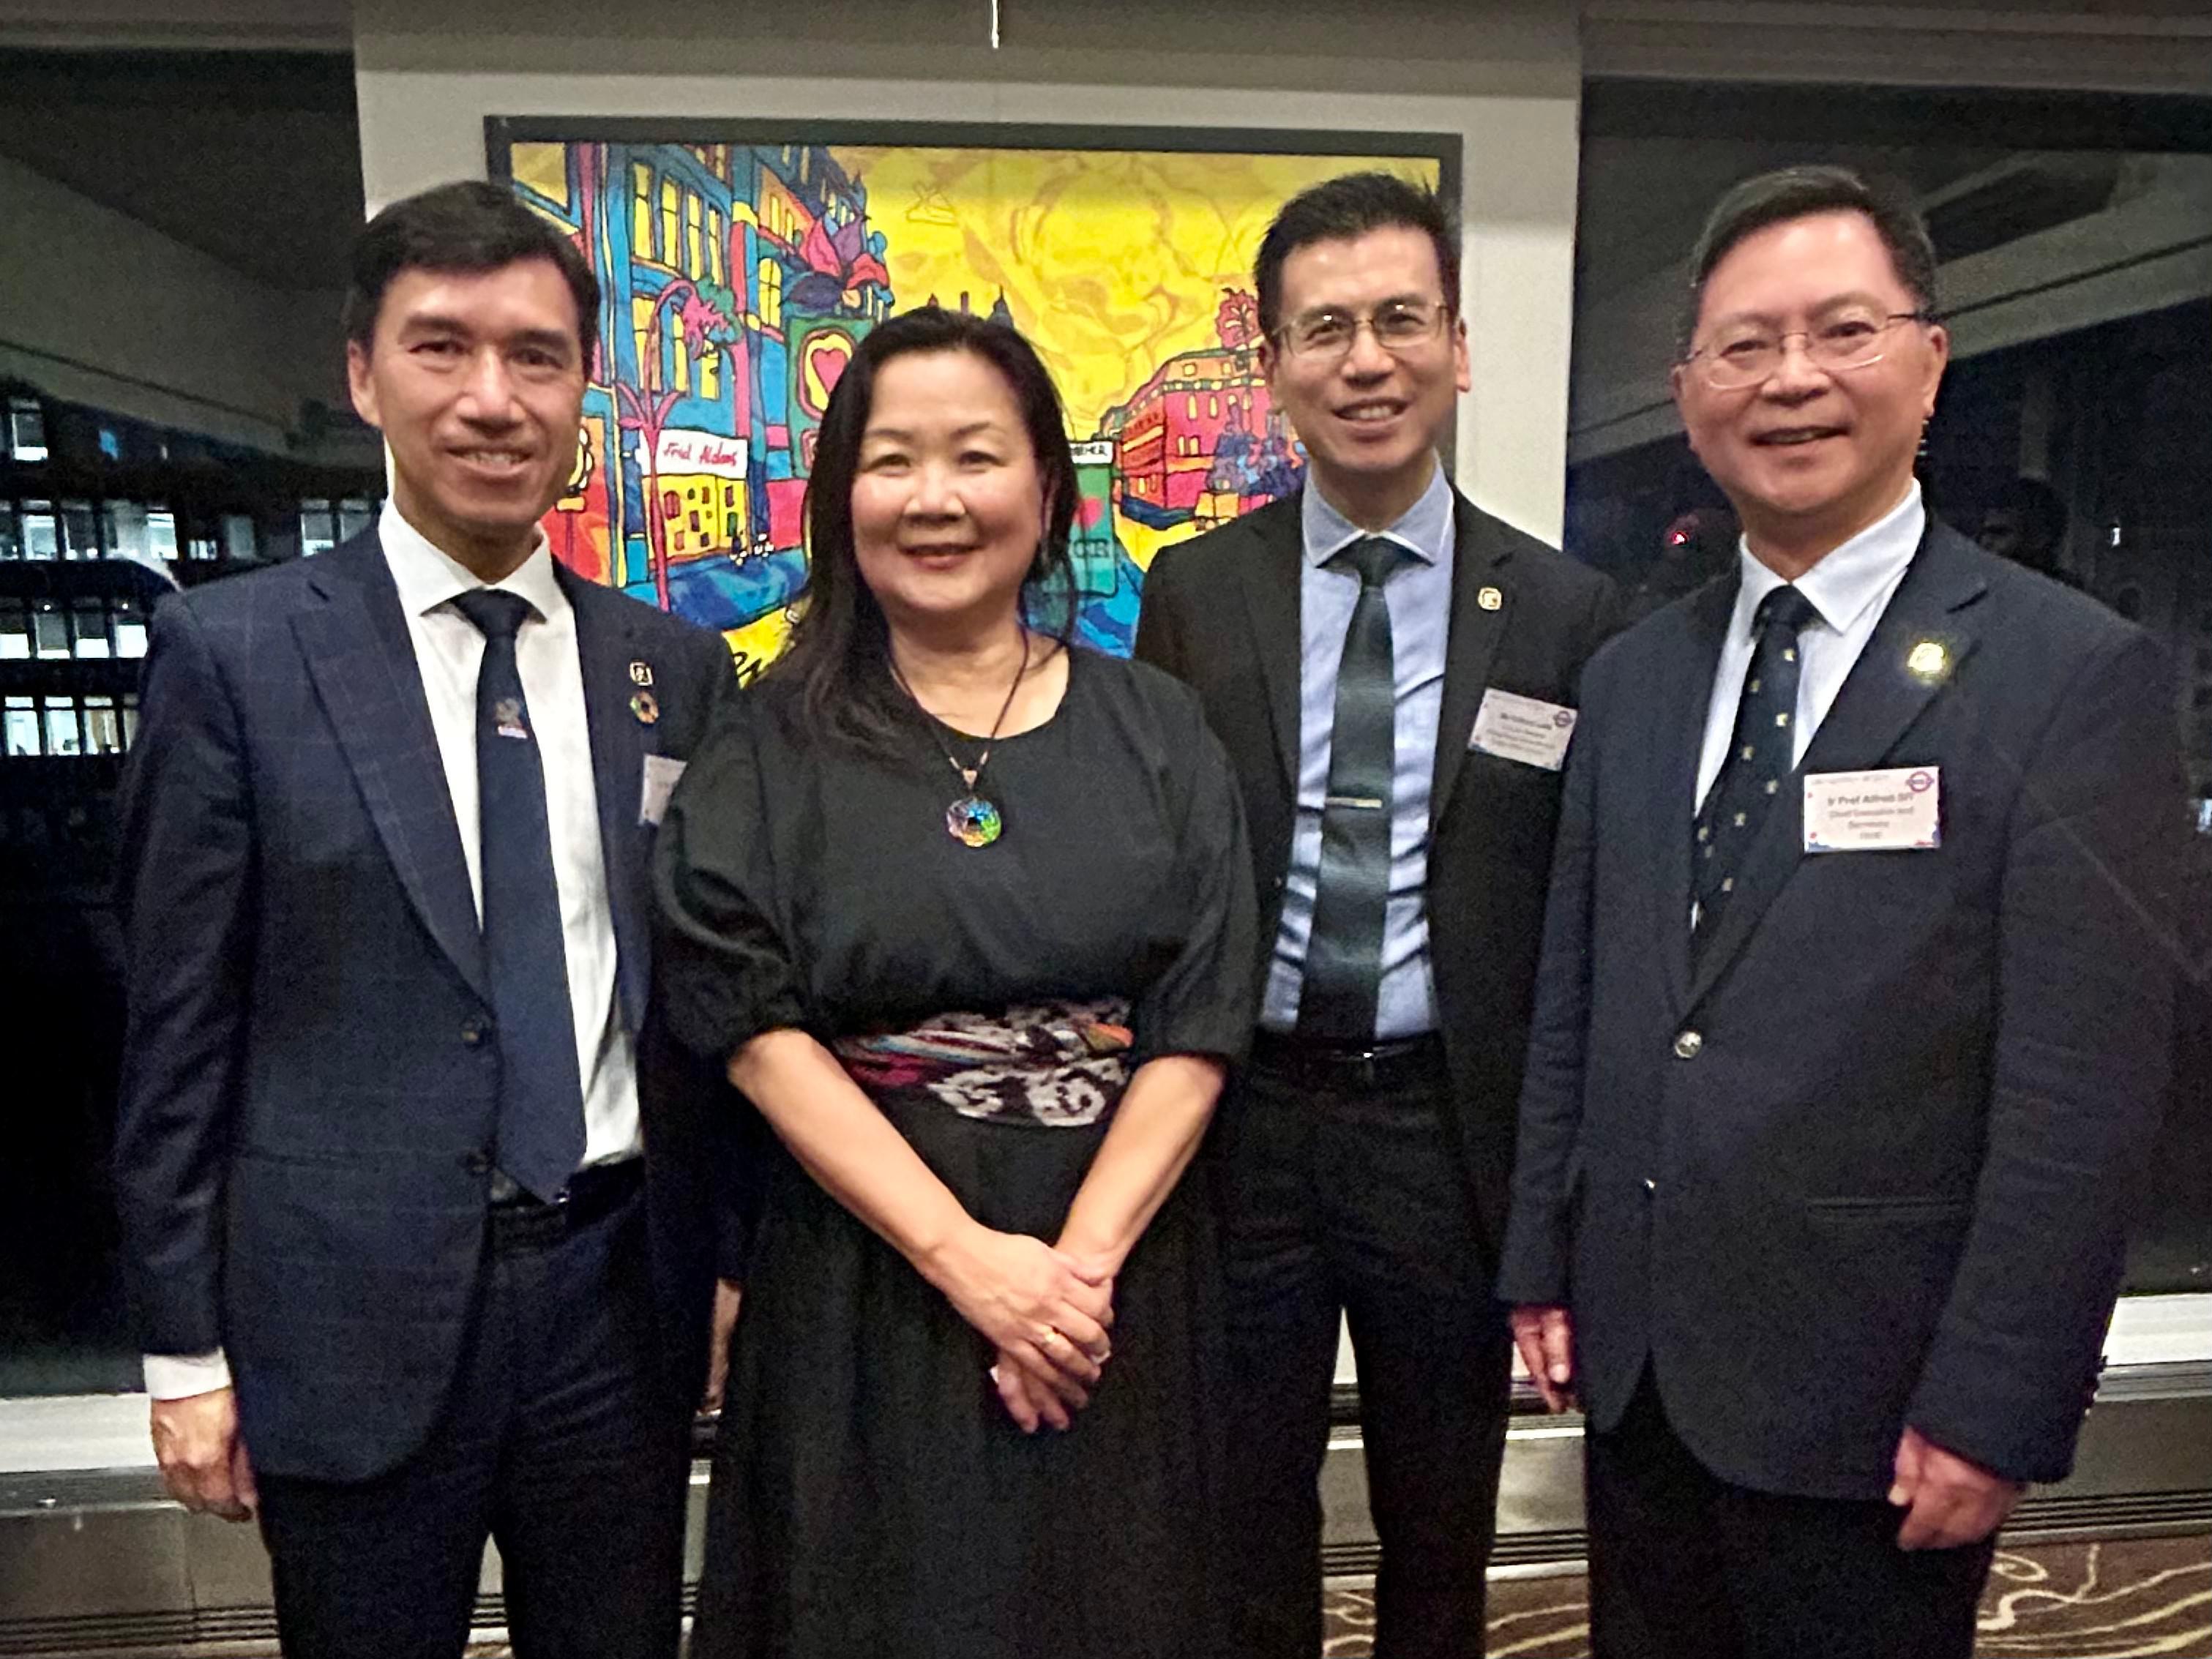 The Hong Kong Economic and Trade Office, London (London ETO) supported a reception organised by the Hong Kong Institution of Engineers (HKIE) in Manchester on November 1 (London Time).  Photo shows (from left) HKIE President, Dr Barry Lee; the Head of Asia Pacific and Smart Cities – Northern Powerhouse, United Kingdom Department for Business and Trade, Ms Philomena Chen; the Director-General of the London ETO, Mr Gilford Law; and HKIE Chief Executive and Secretary, Professor Alfred Sit, attending the reception.